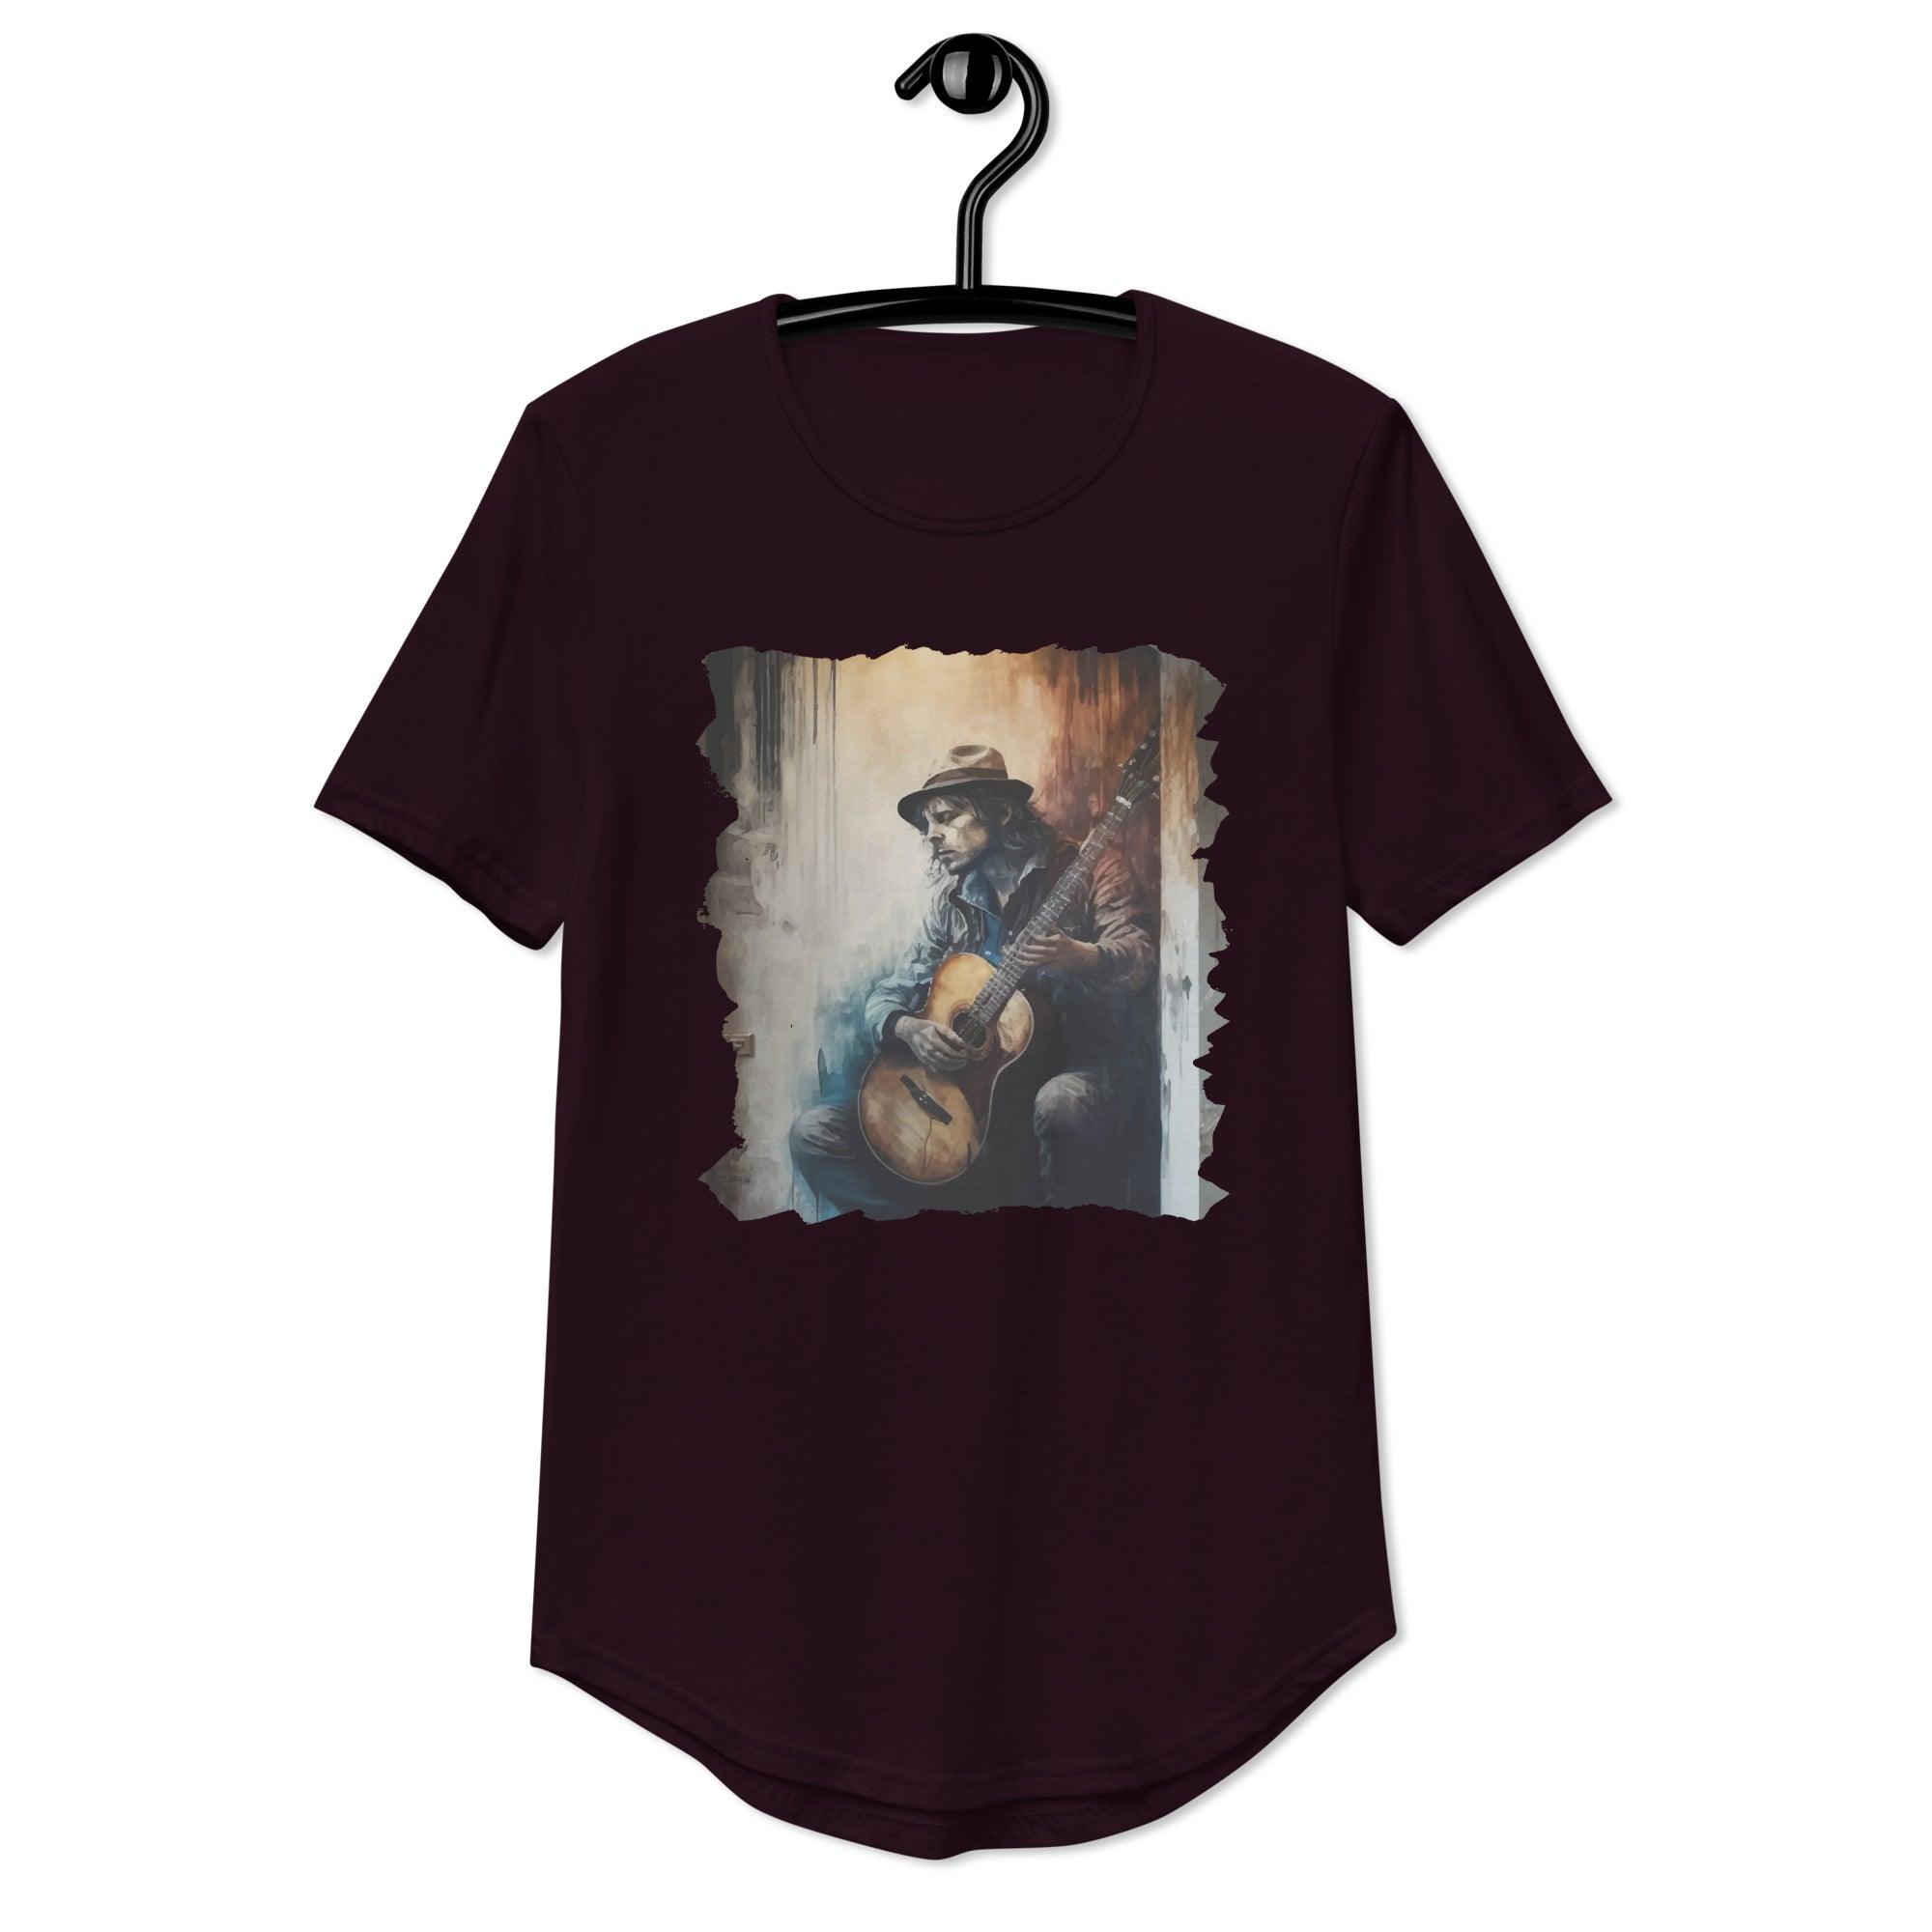 Guitar Is Poetry in Motion Men's Curved Hem T-Shirt - Beyond T-shirts